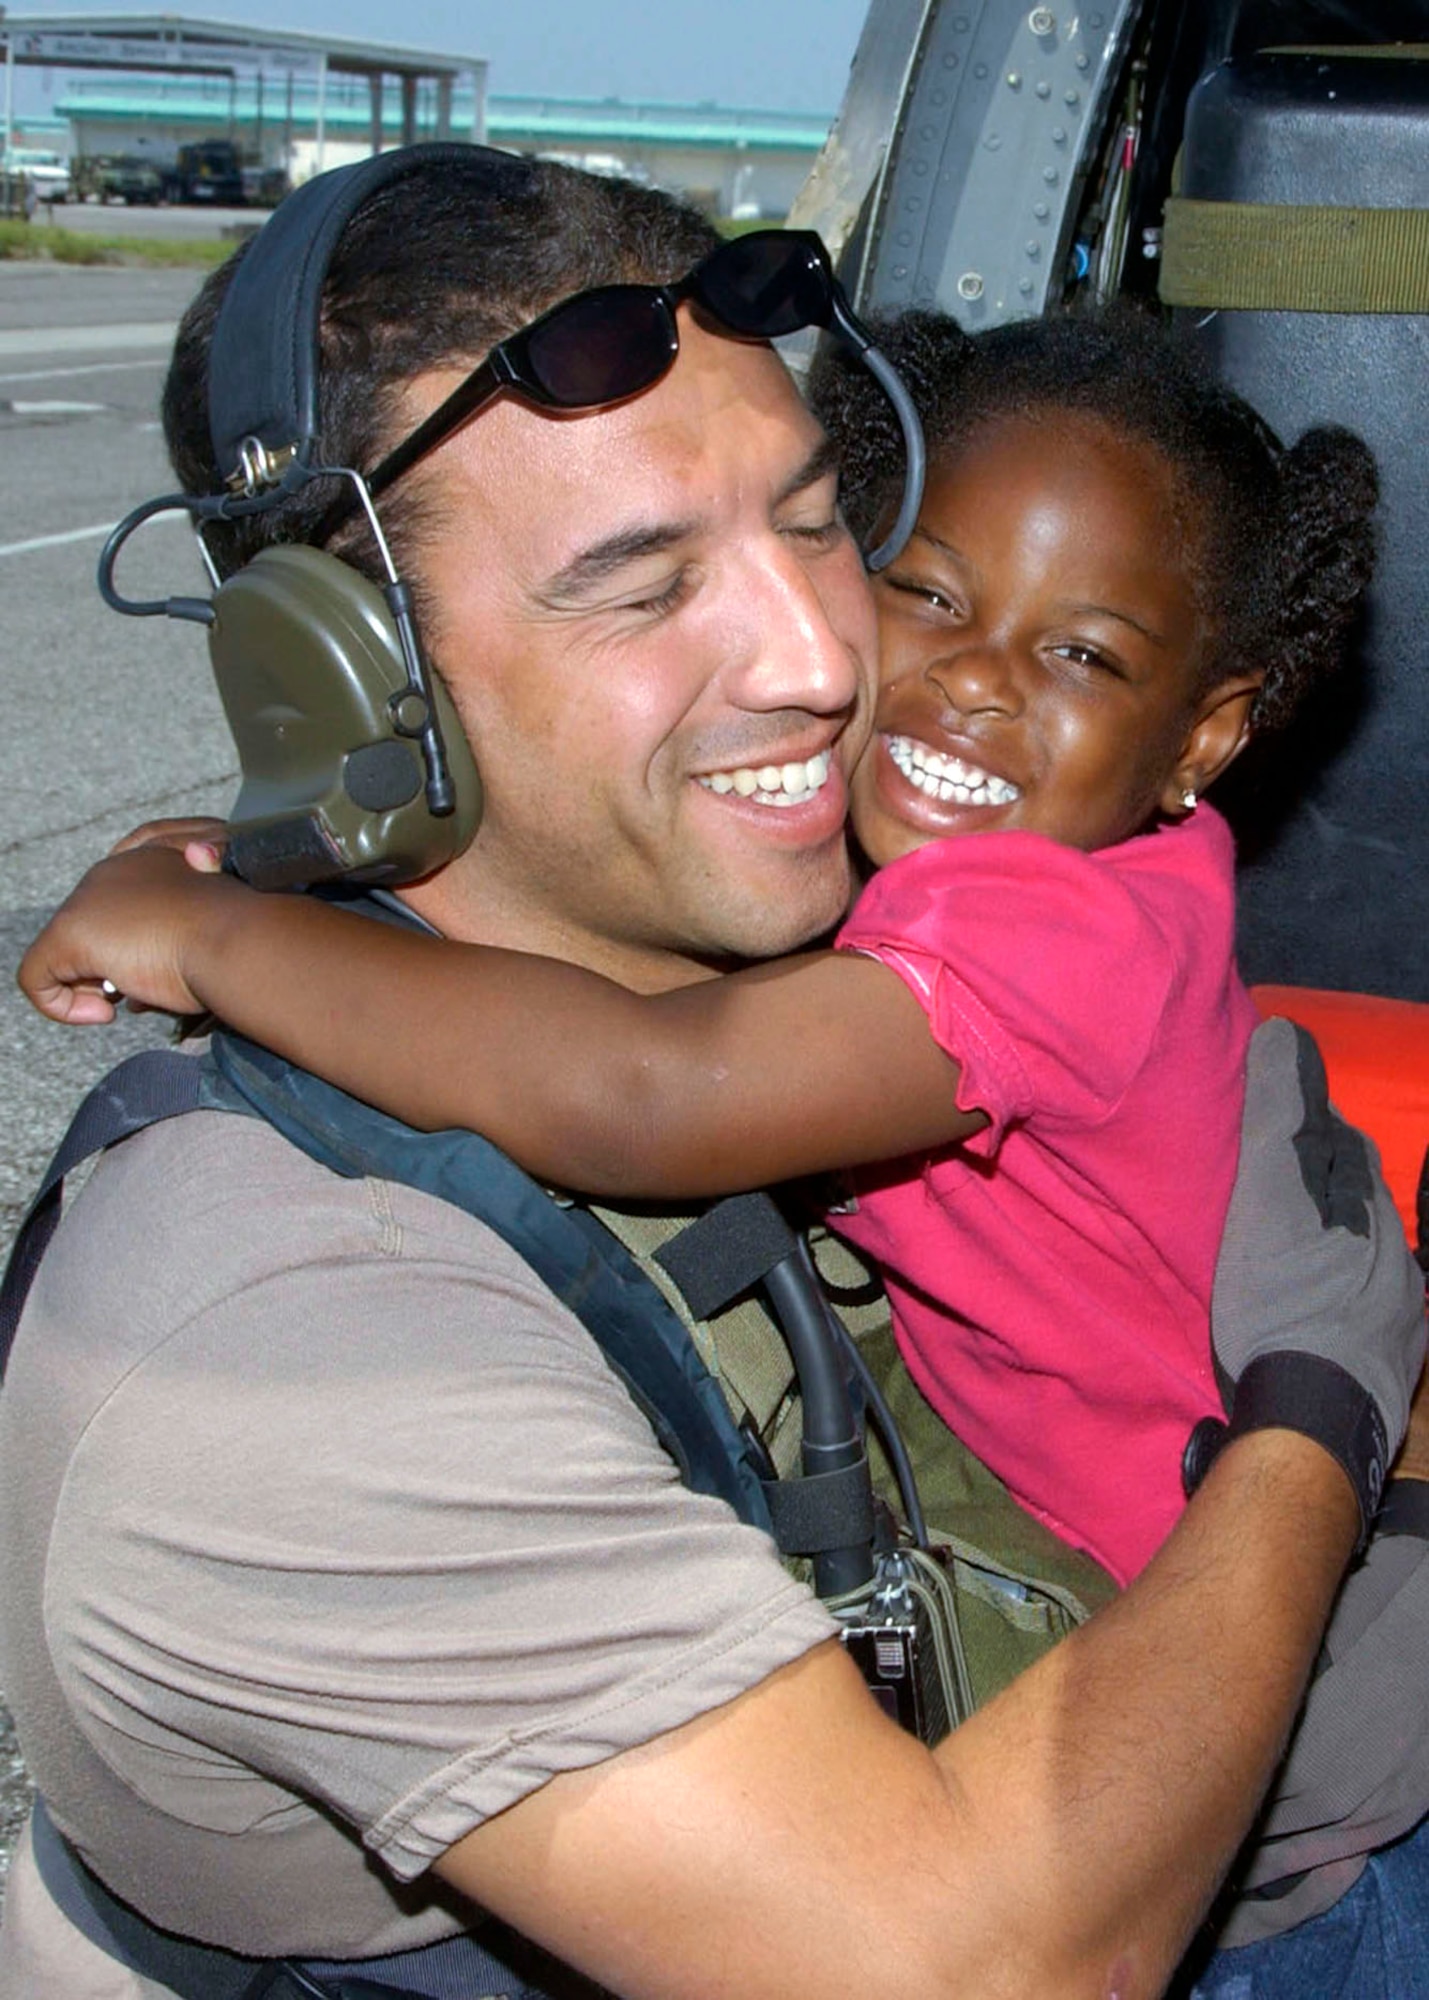 NEW ORLEANS -- A young Hurricane Katrina survivor hugs her rescuer, Staff Sgt. Mike Maroney, after she was relocated to the Louis Armstrong New Orleans International Airport, La., on Sept. 7.  Sergeant Maroney is a pararescueman from the 58th Rescue Squadron at Nellis Air Force Base, Nev.  (U.S. Air Force photo by Airman 1st Class Veronica Pierce)